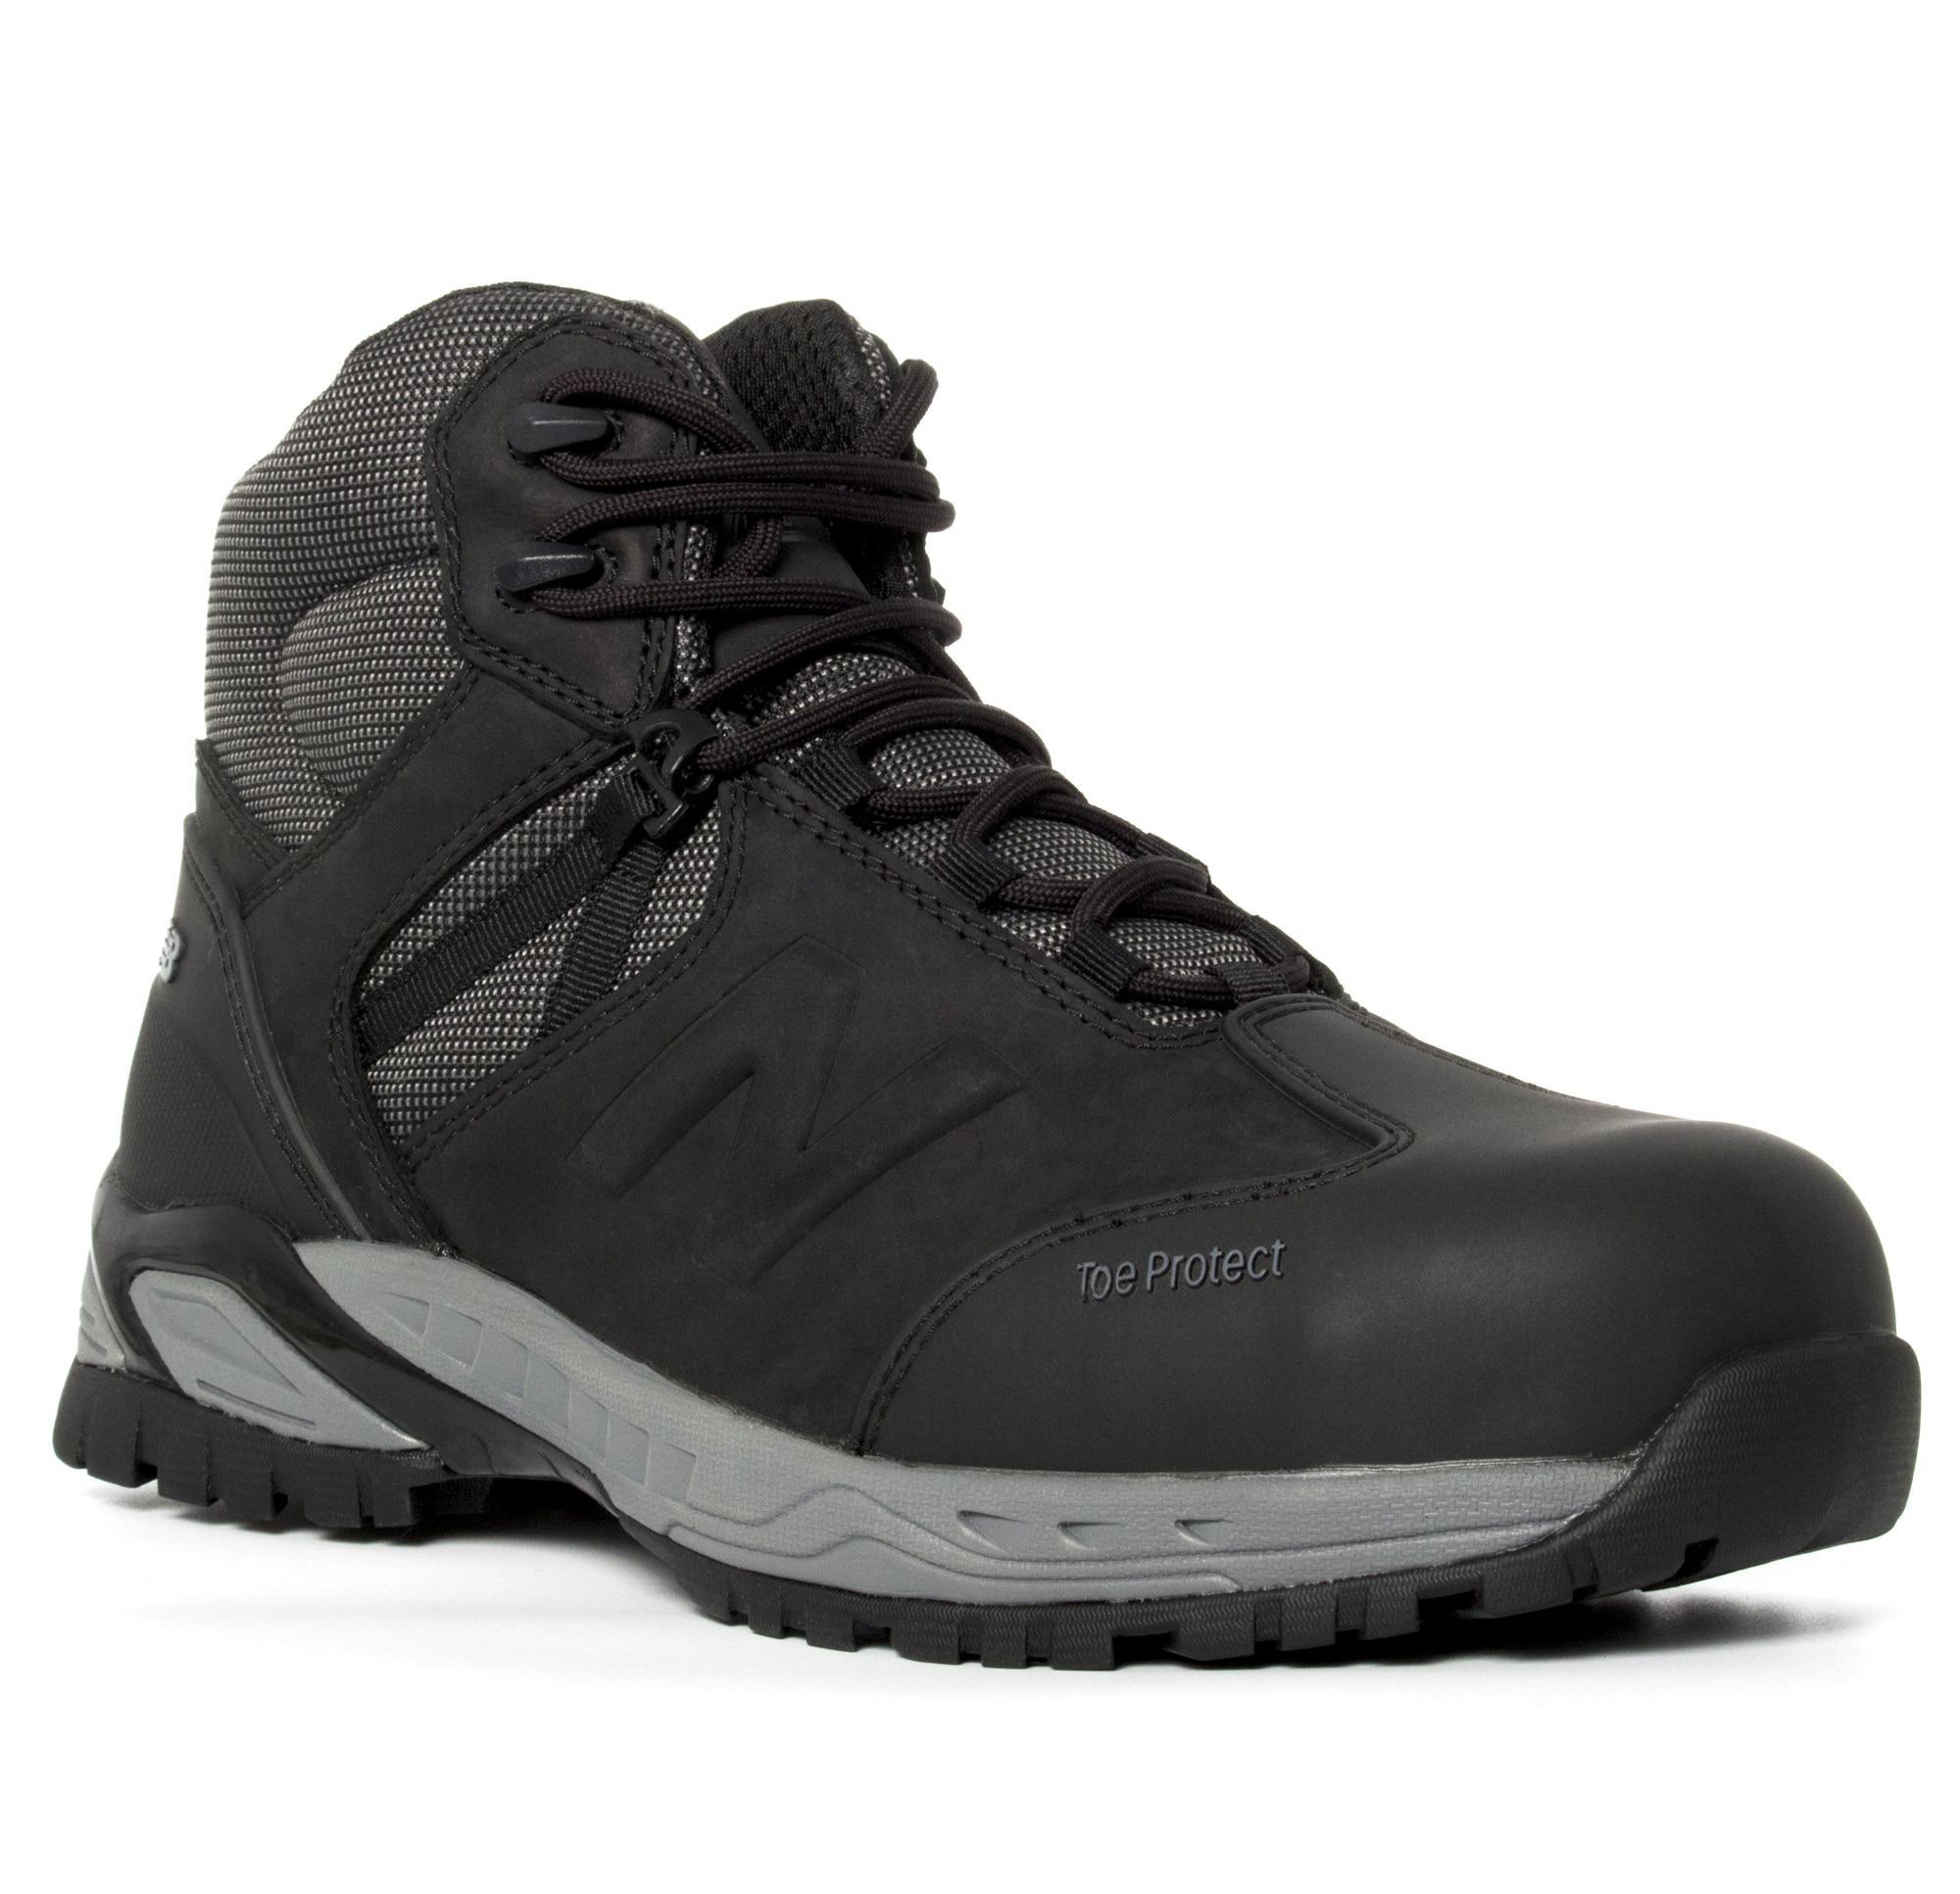 New Balance All Site Waterproof Boot